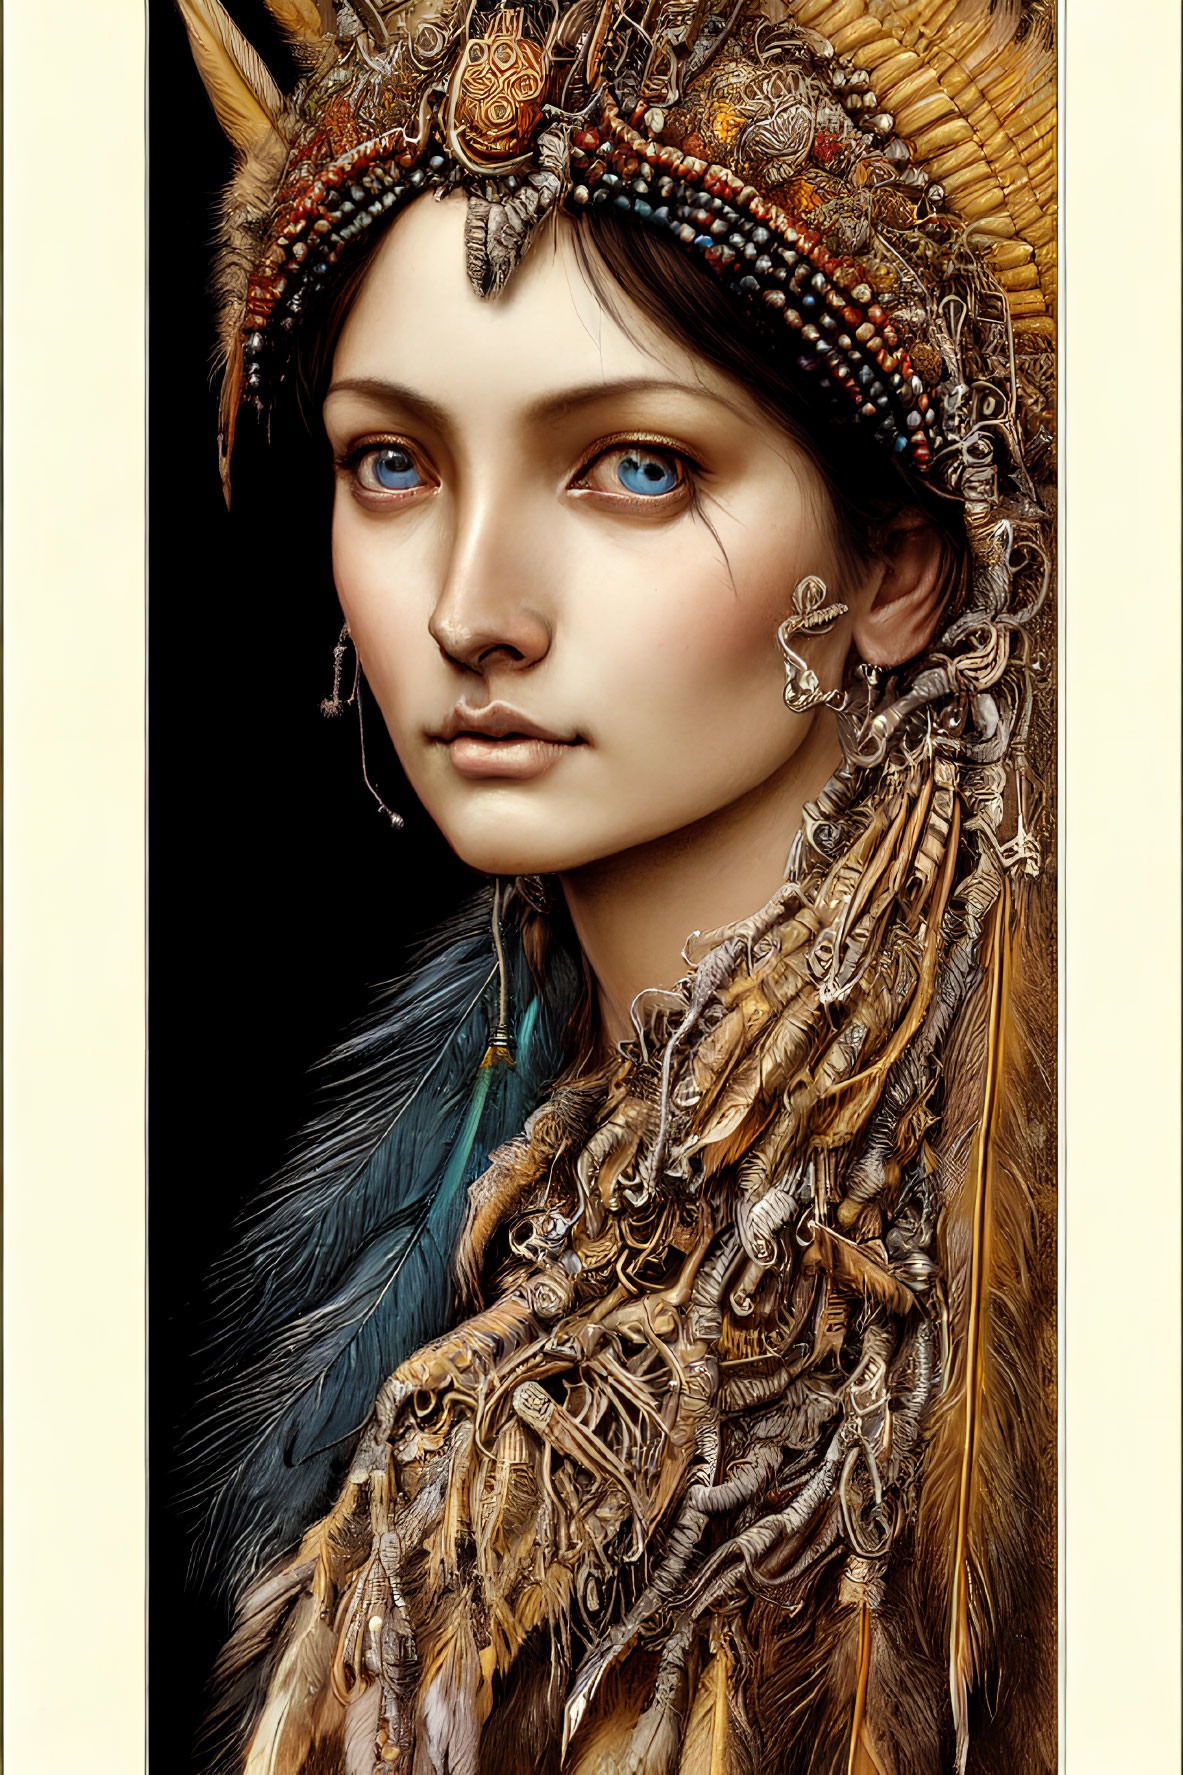 Detailed Illustration of Person with Ornate Headdress and Striking Blue Eyes